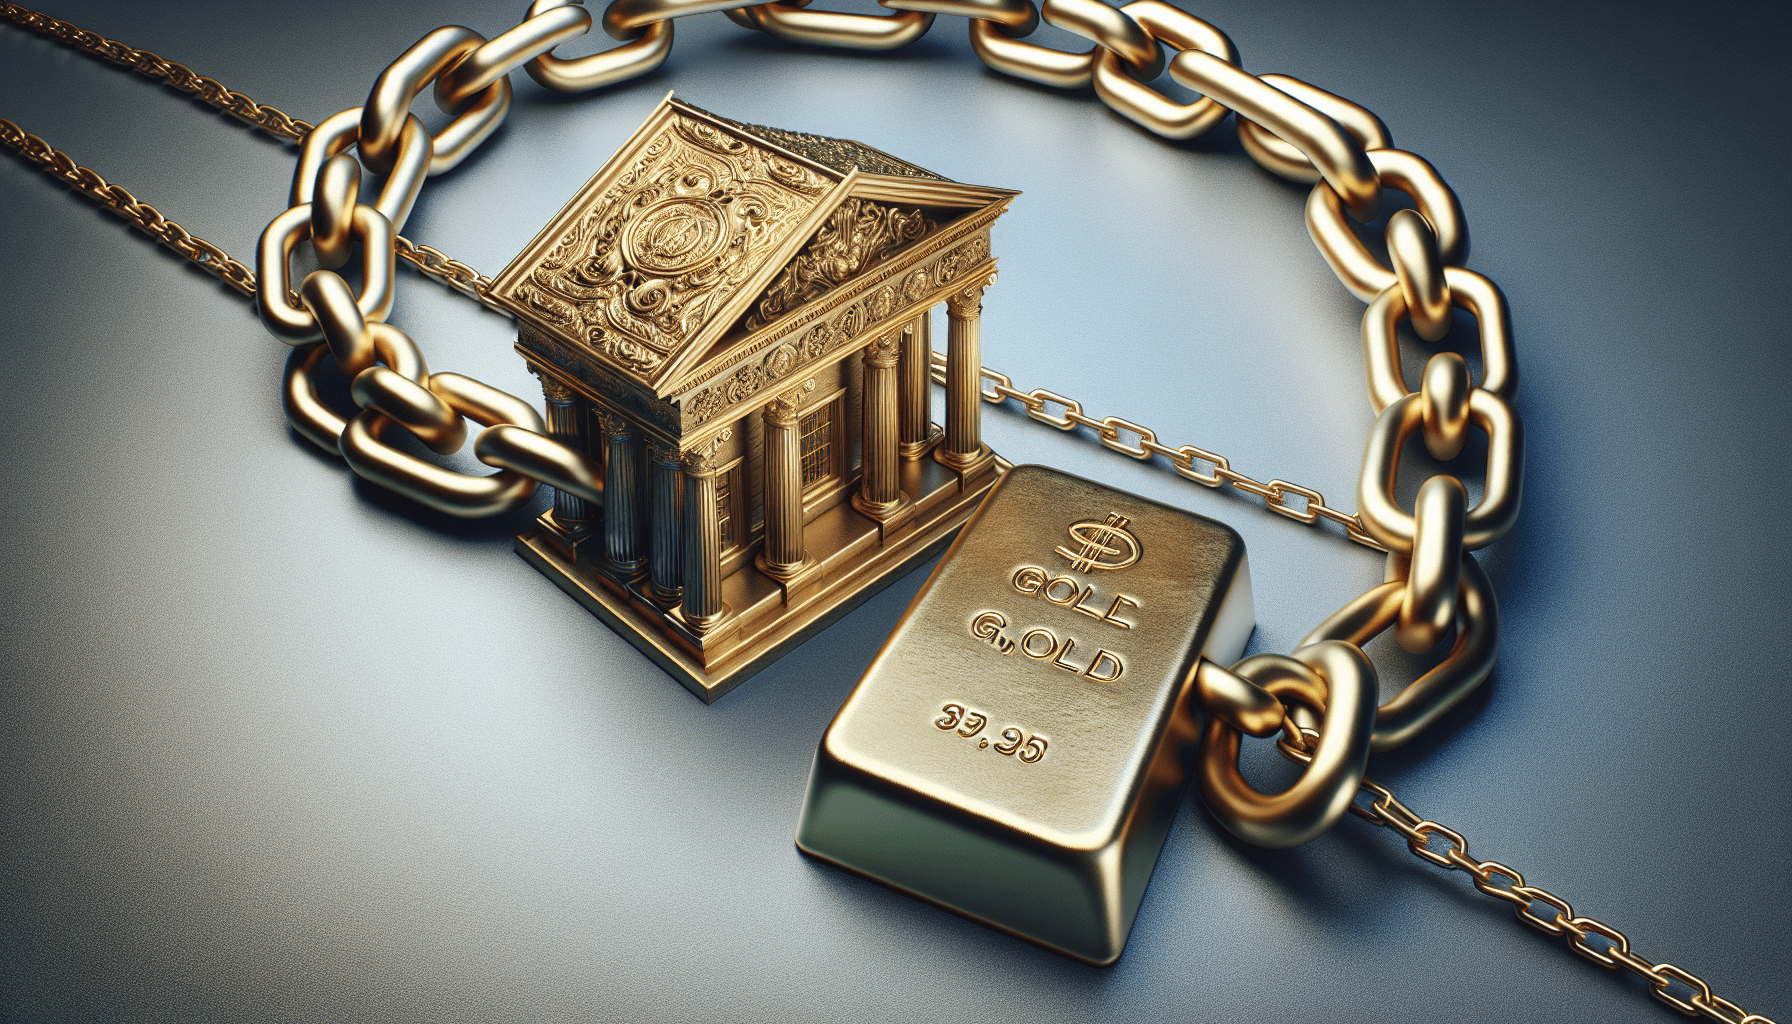 Do Malaysian Banks Provide Regular Updates Or Statements On Gold Investments?